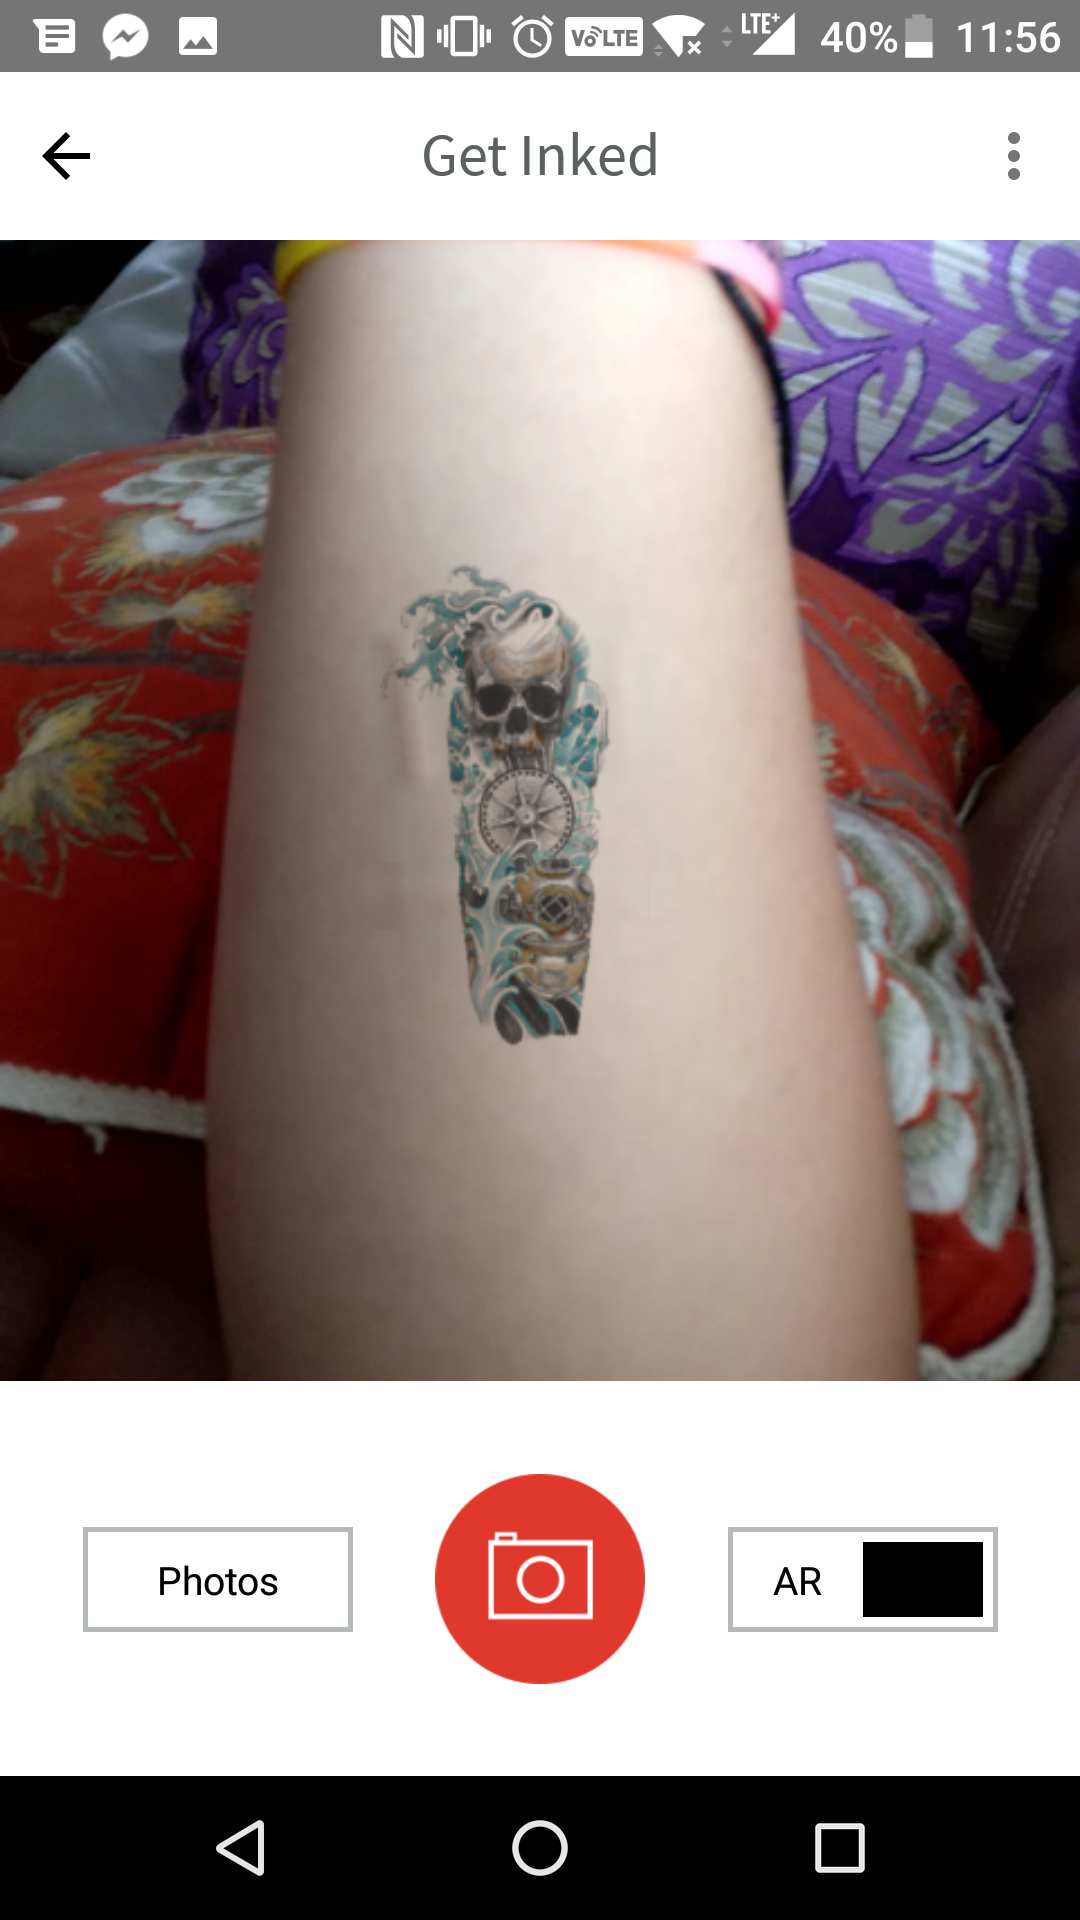 Use This App to Test Out Tattoos Before They're Permanent « Mobile AR News  :: Next Reality